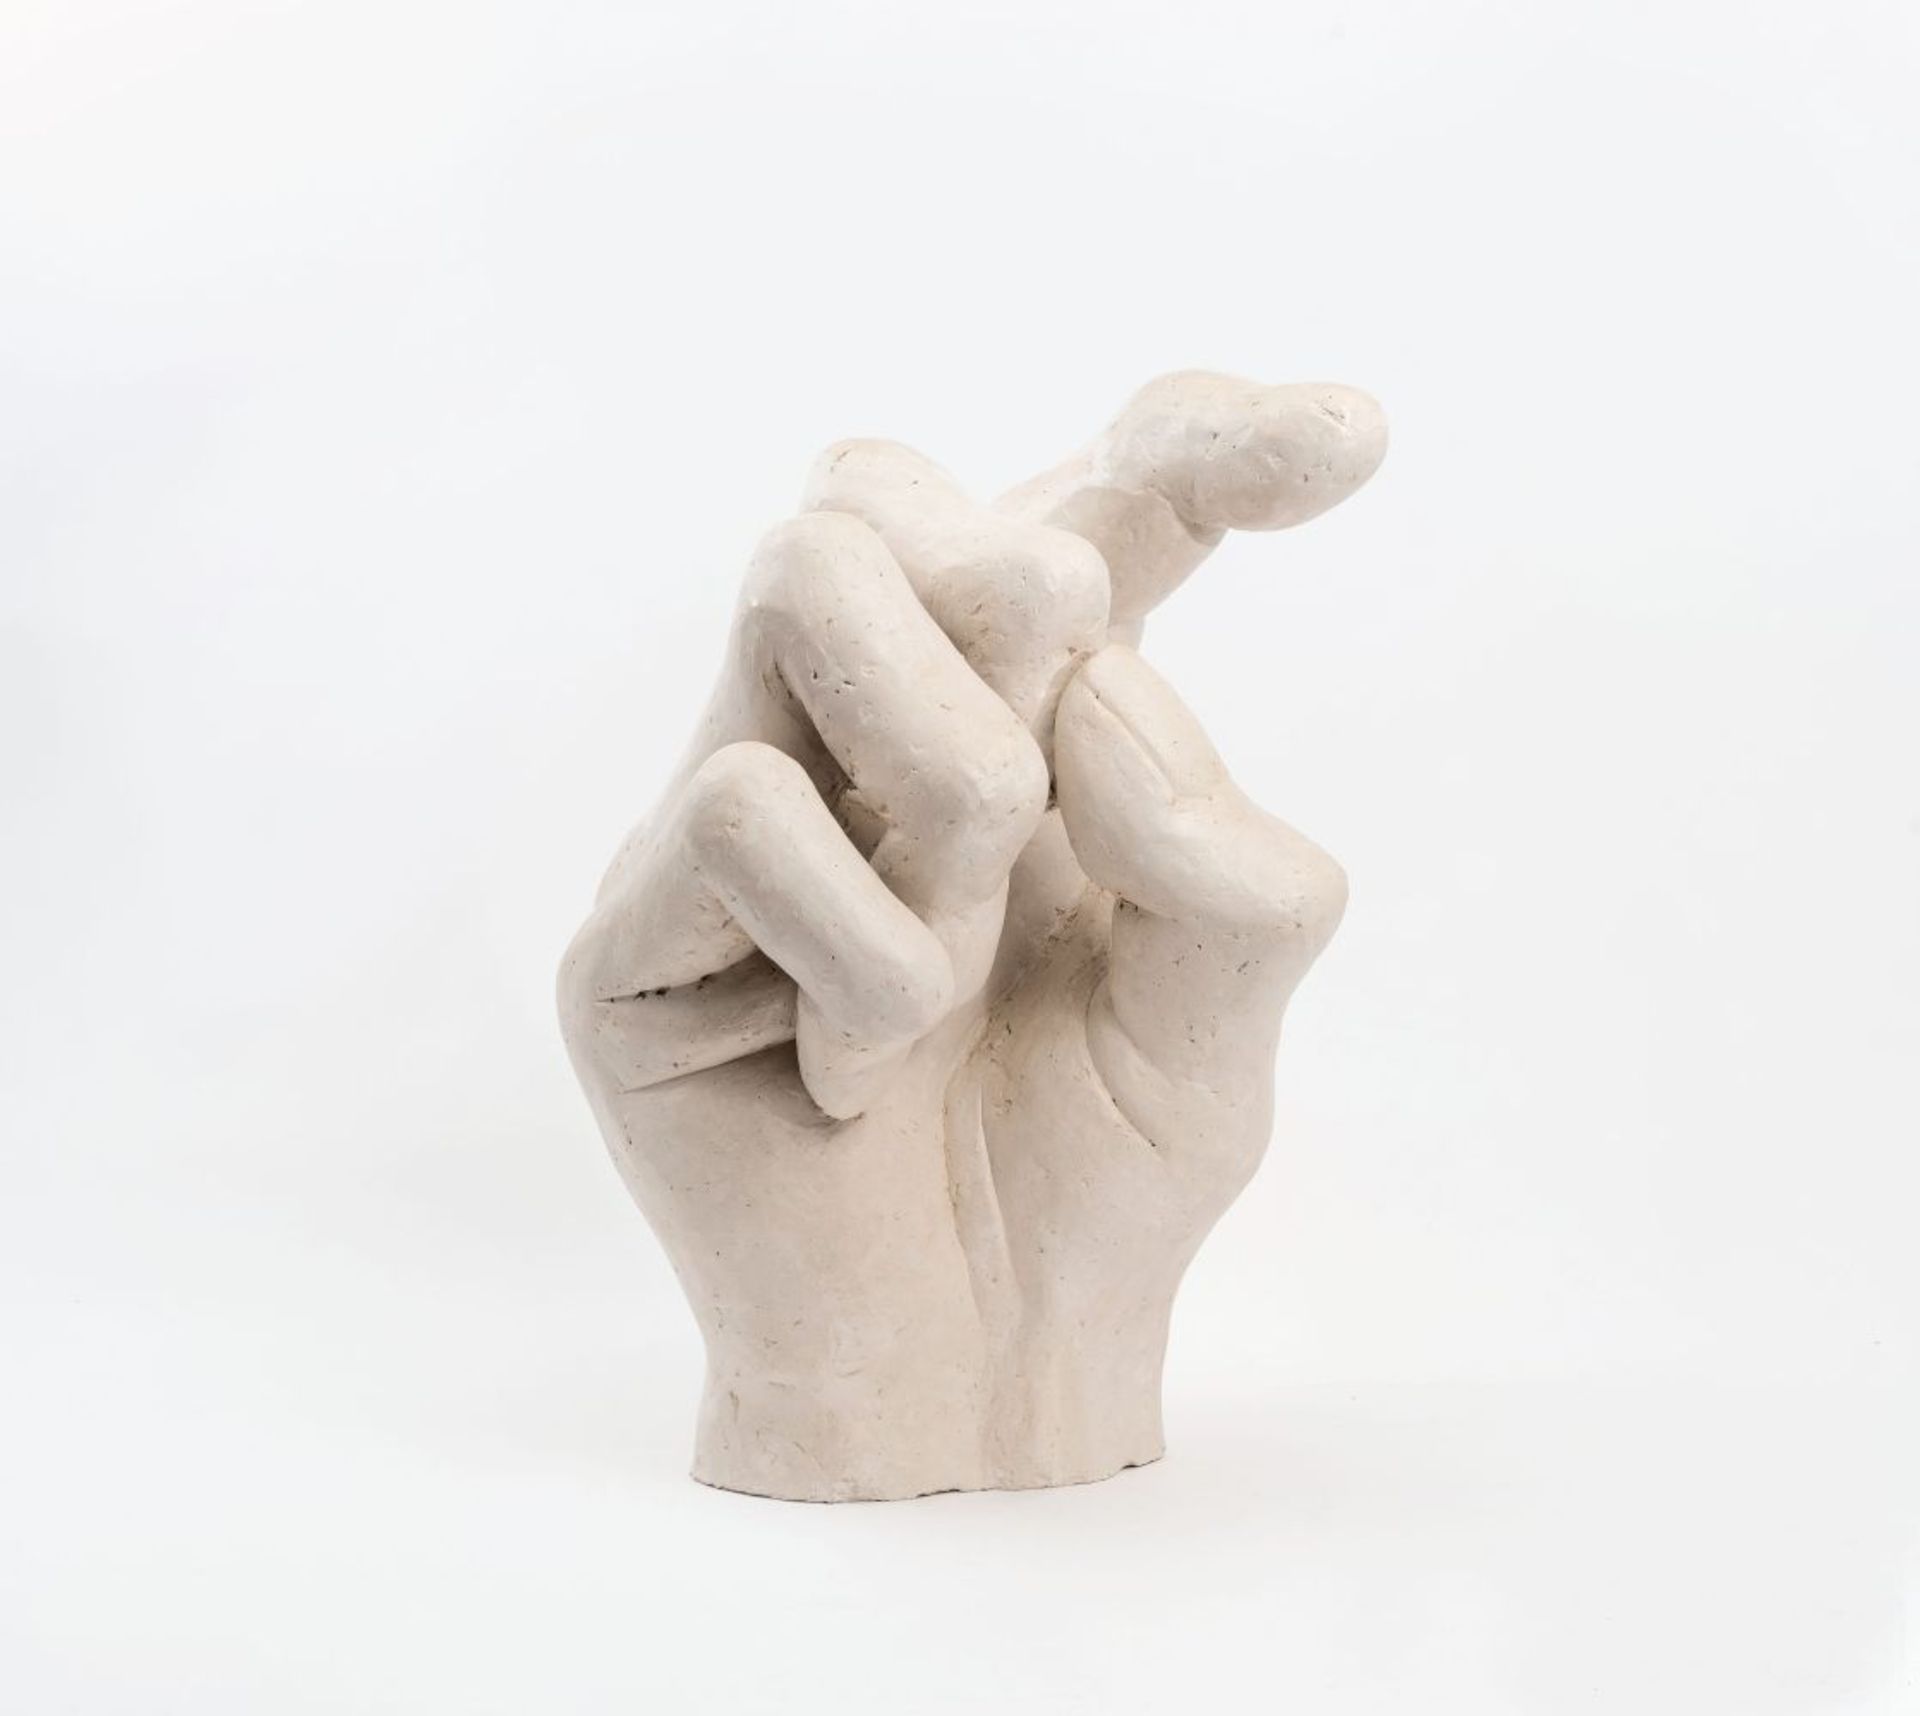 Neumann, Evelyn. A Large Plaster Sculpture 'Right Hand'.